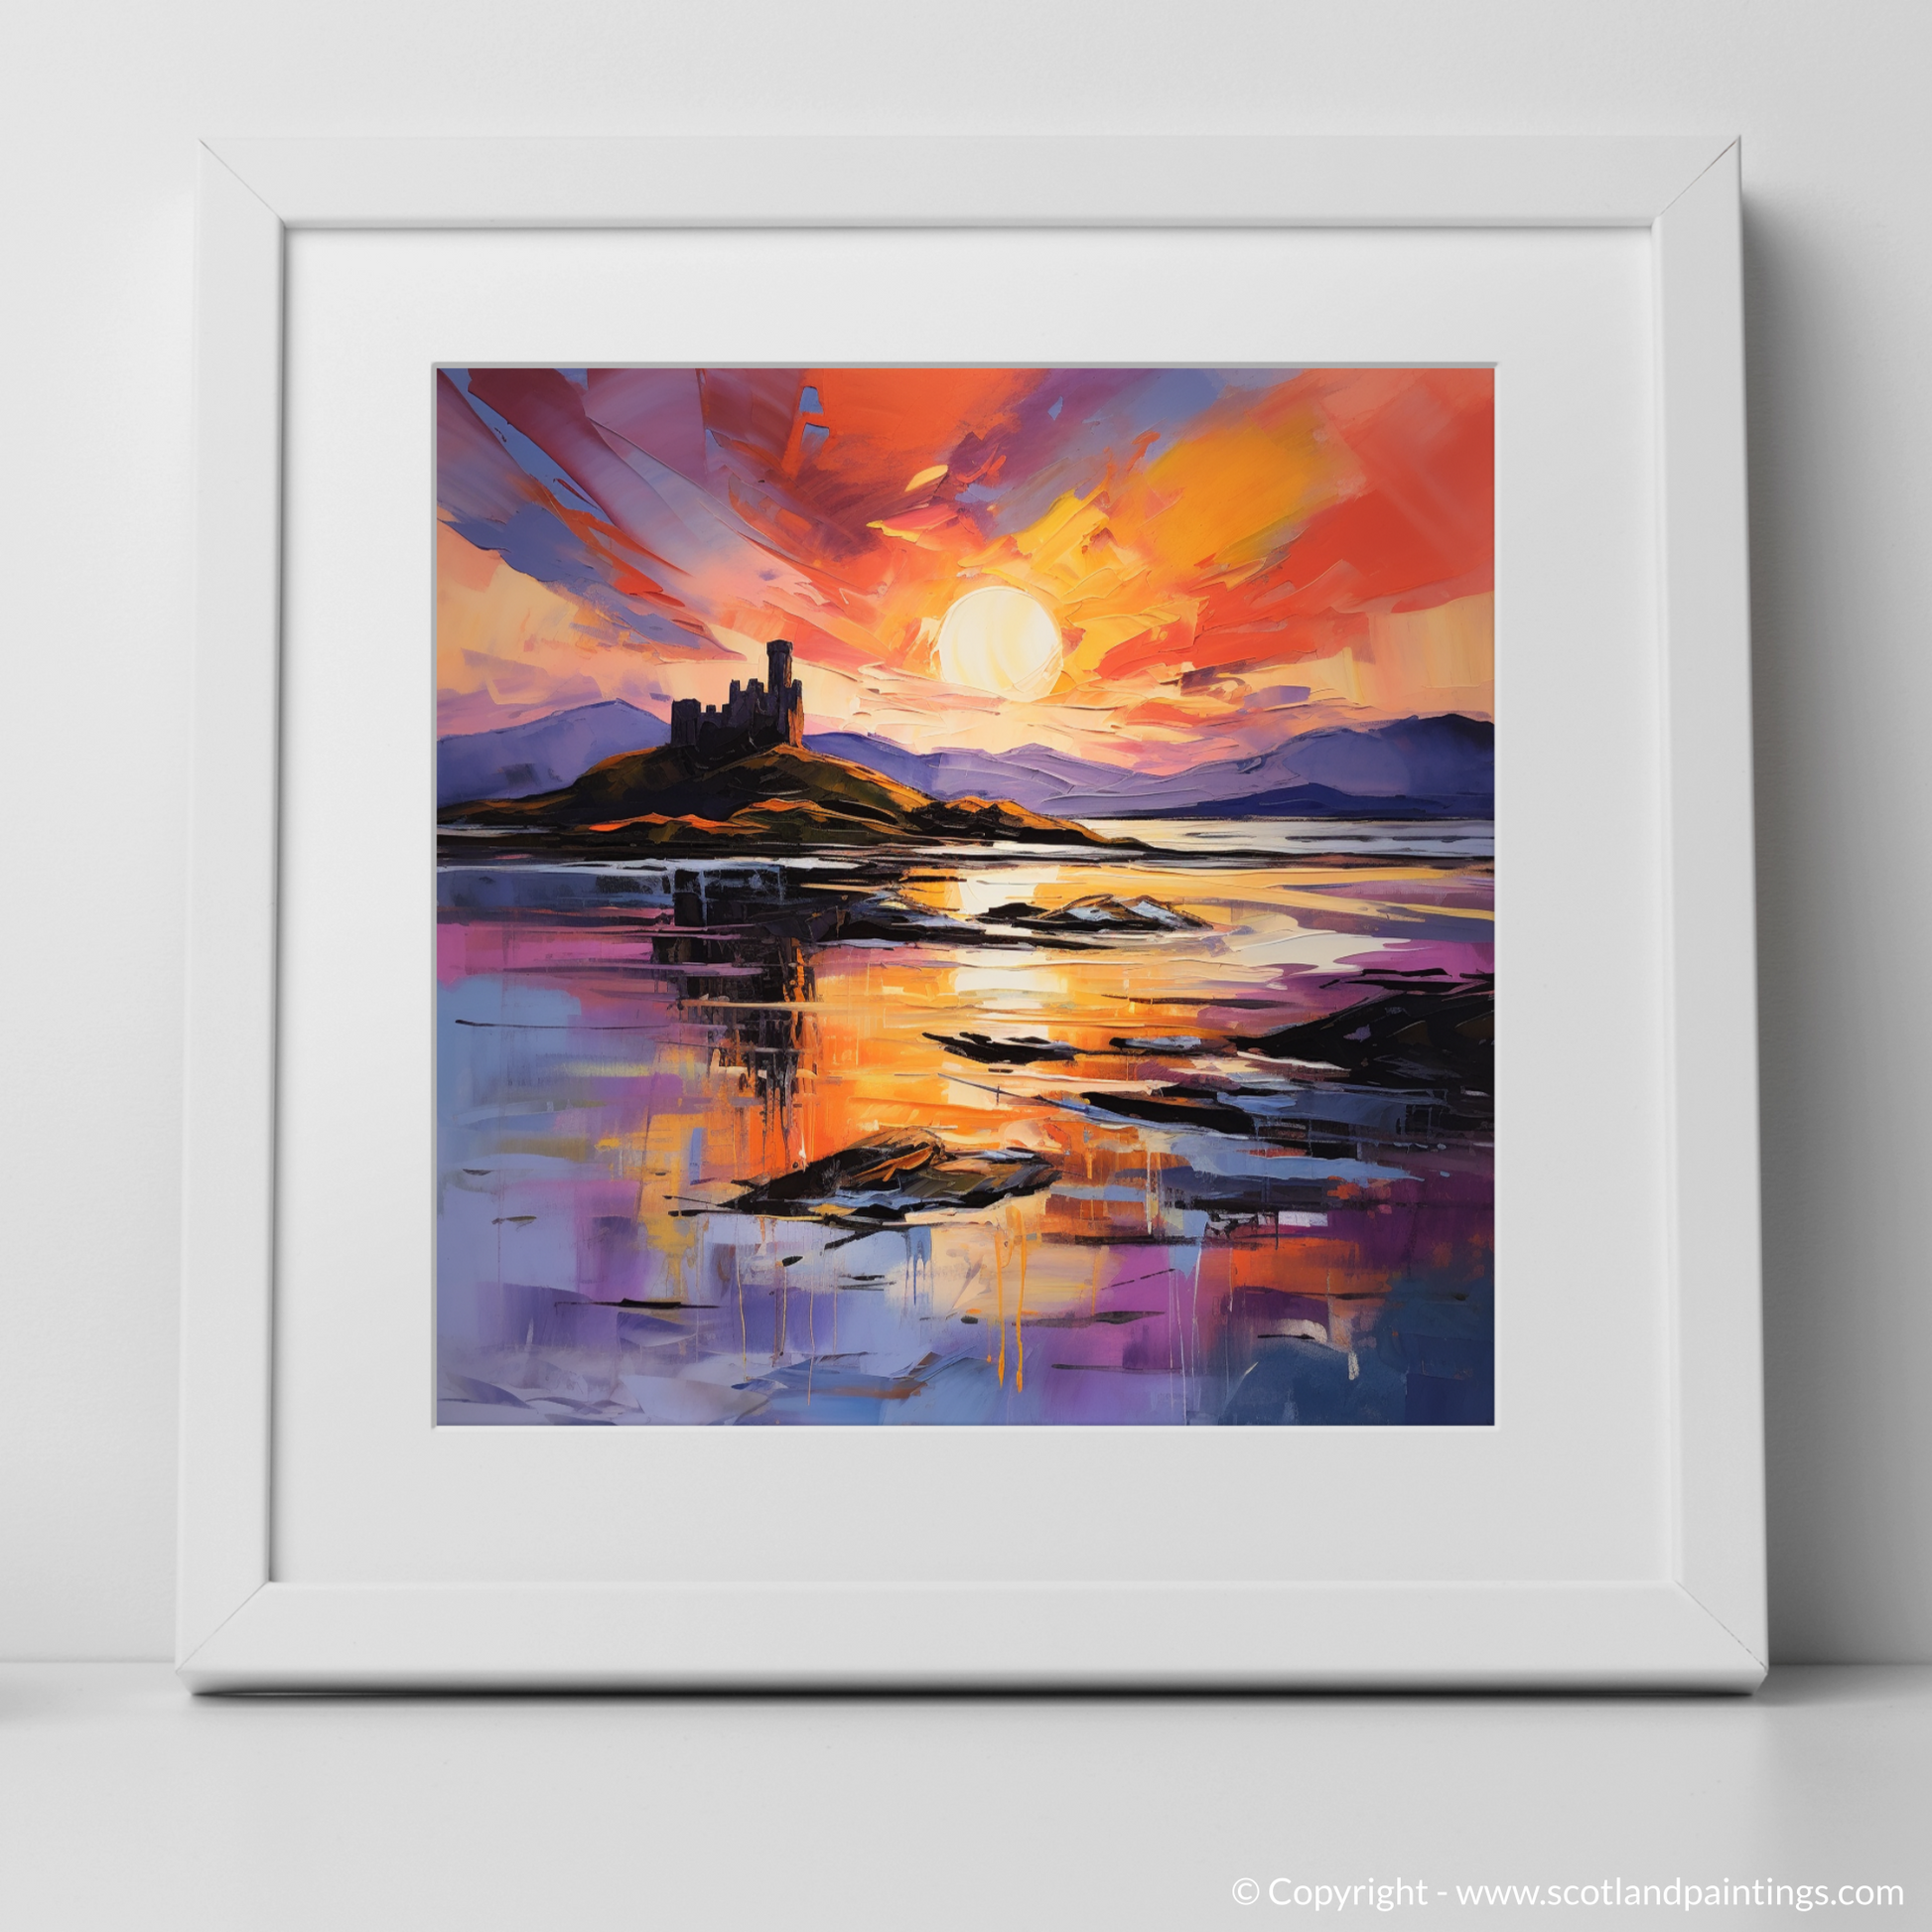 Art Print of Castle Stalker Bay at sunset with a white frame